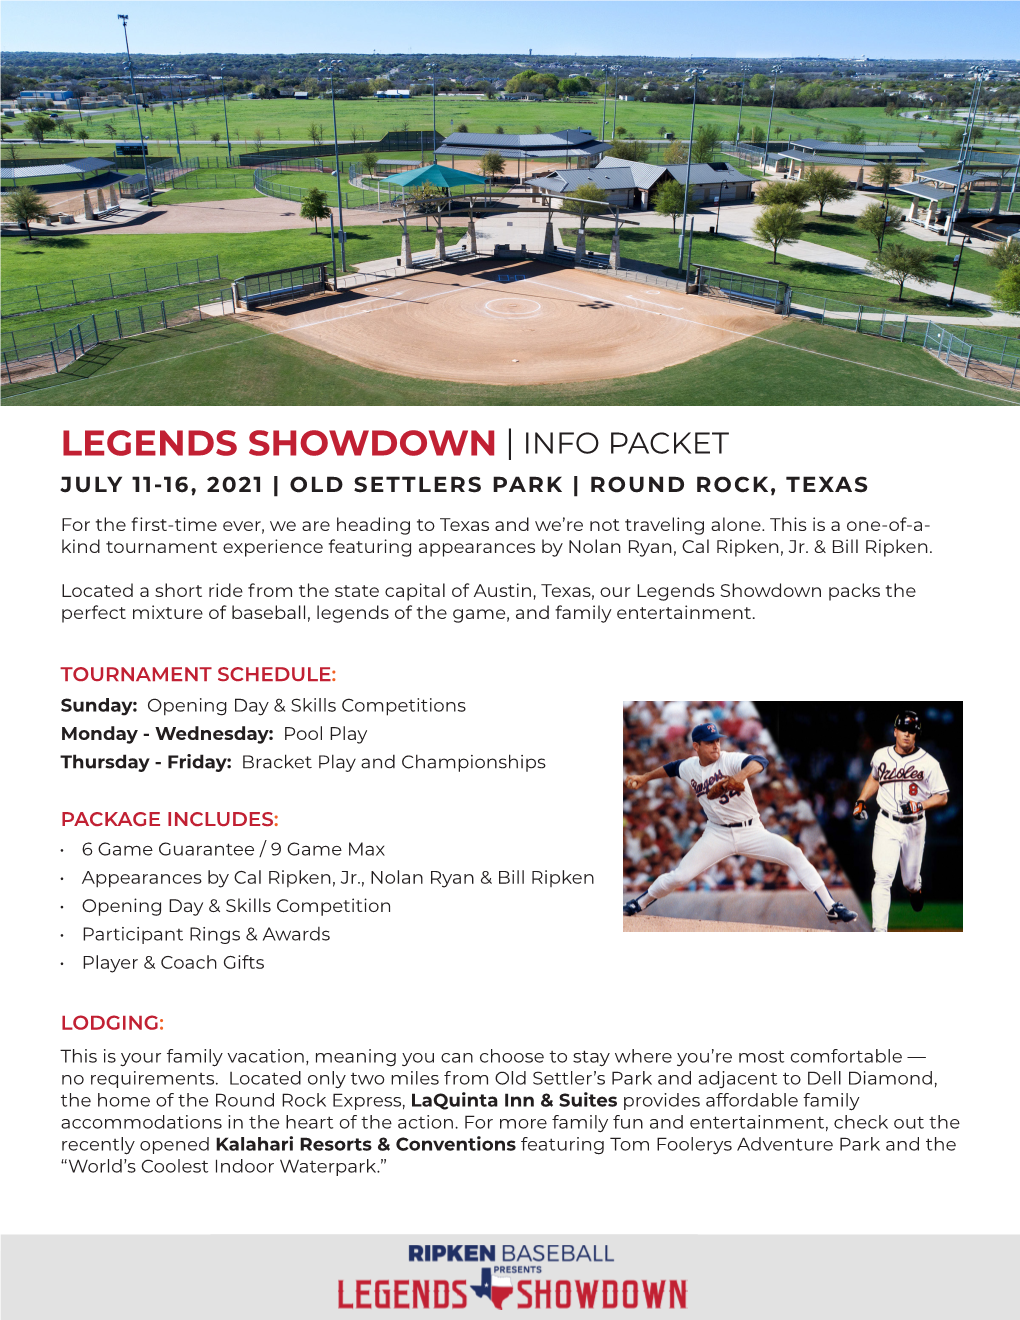 Legends Showdown | Info Packet July 11-16, 2021 | Old Settlers Park | Round Rock, Texas